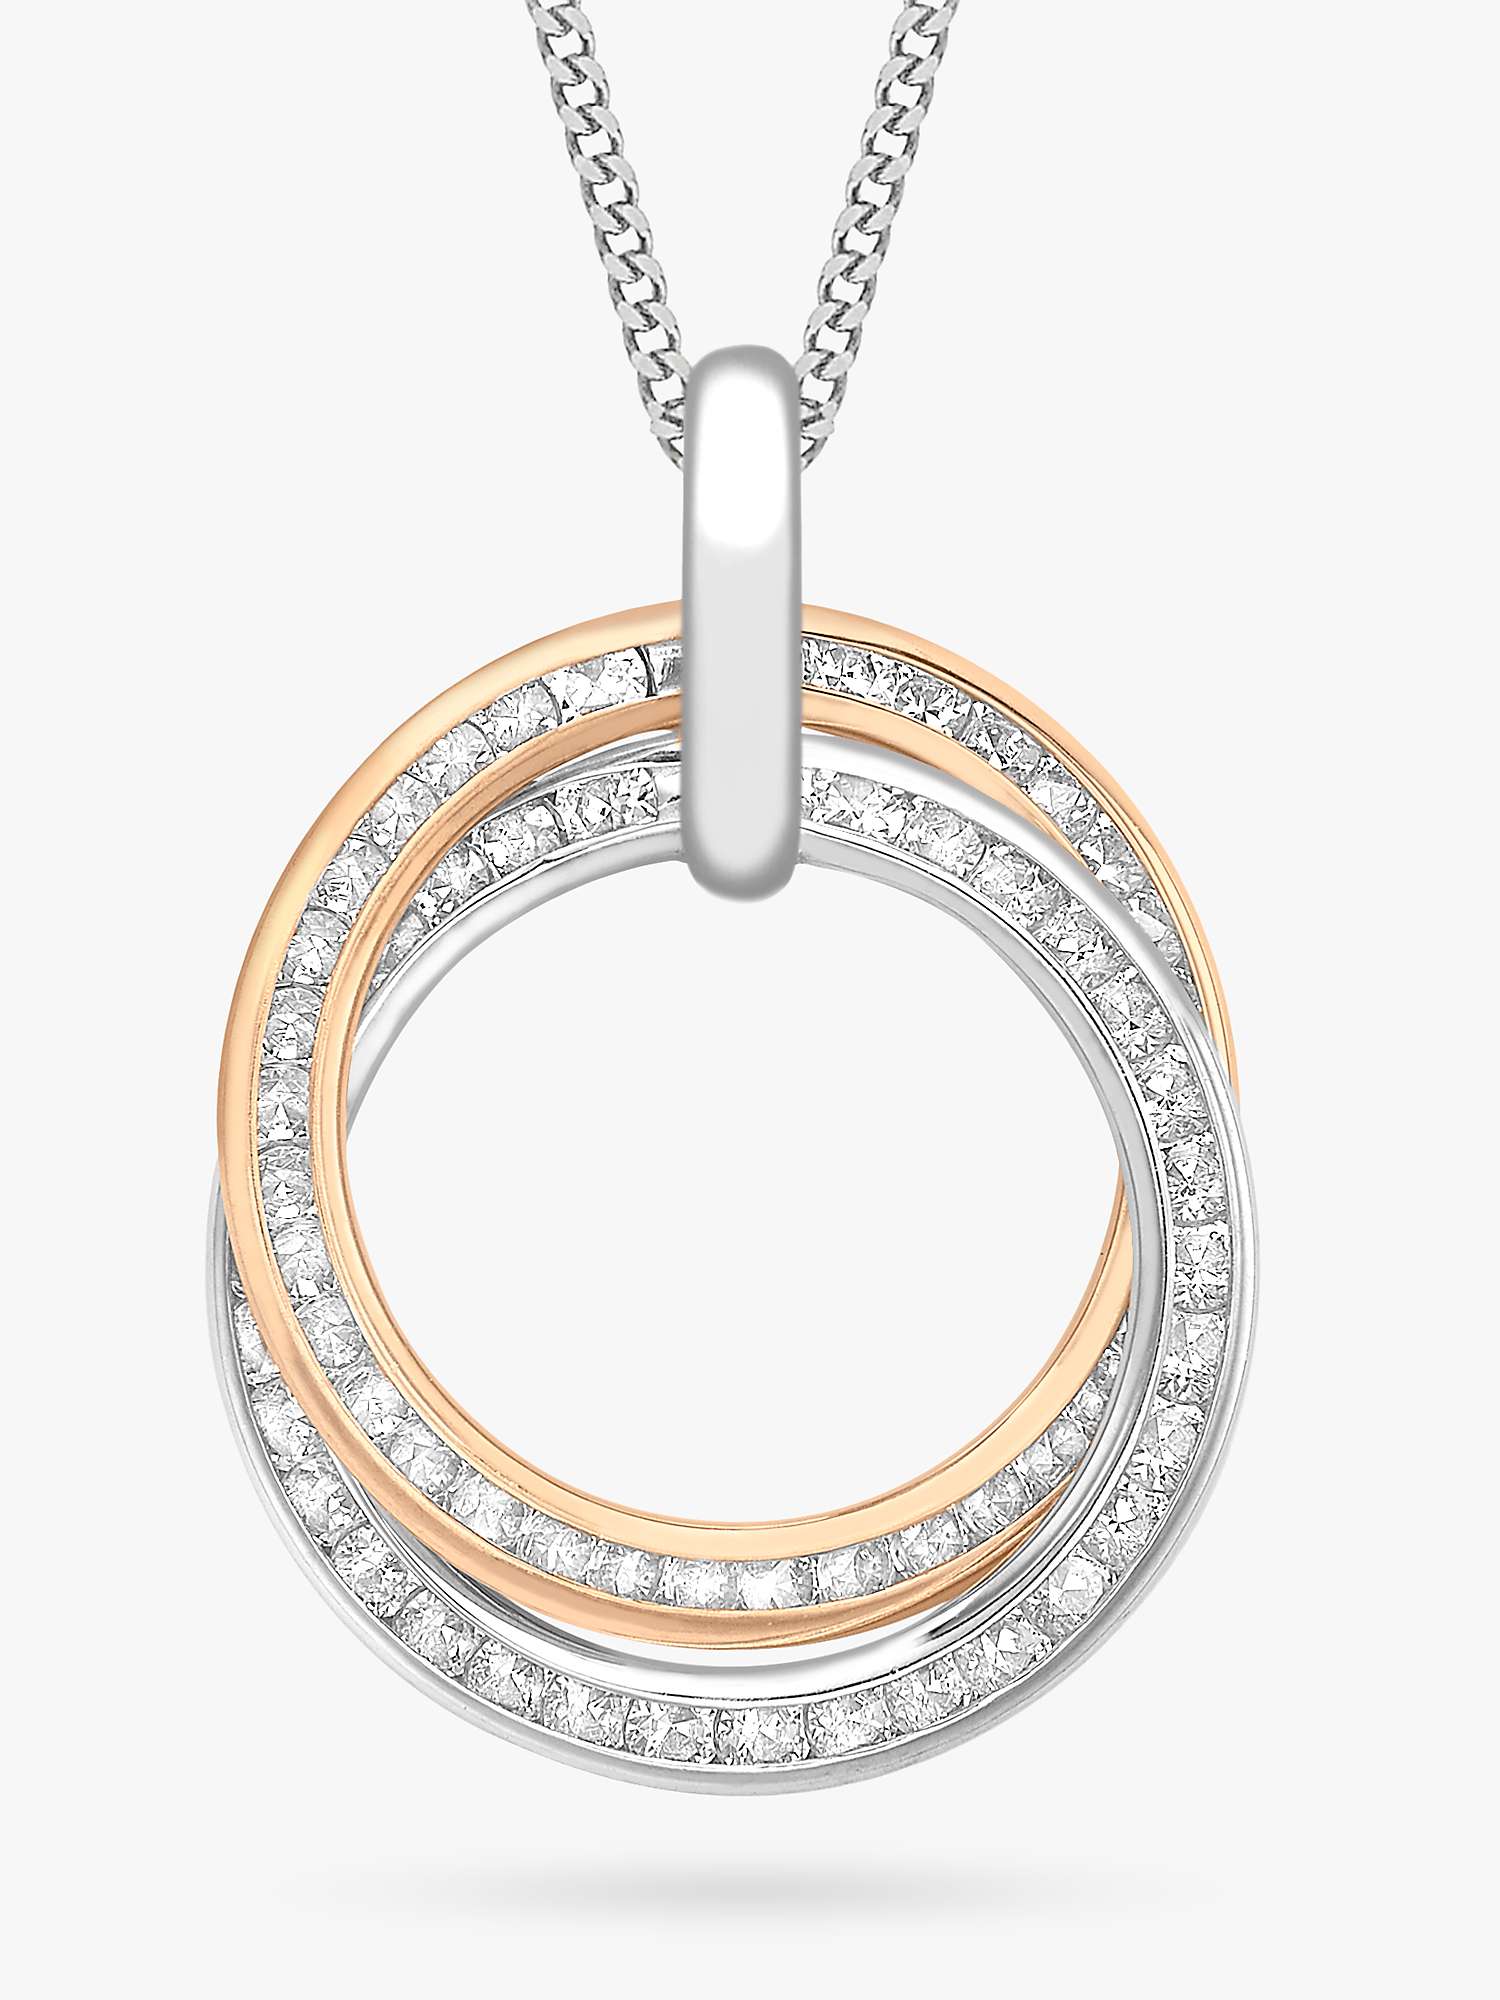 Buy IBB 9ct Gold Cubic Zirconia Double Ring Pendant Necklace, White Gold/Rose Gold Online at johnlewis.com